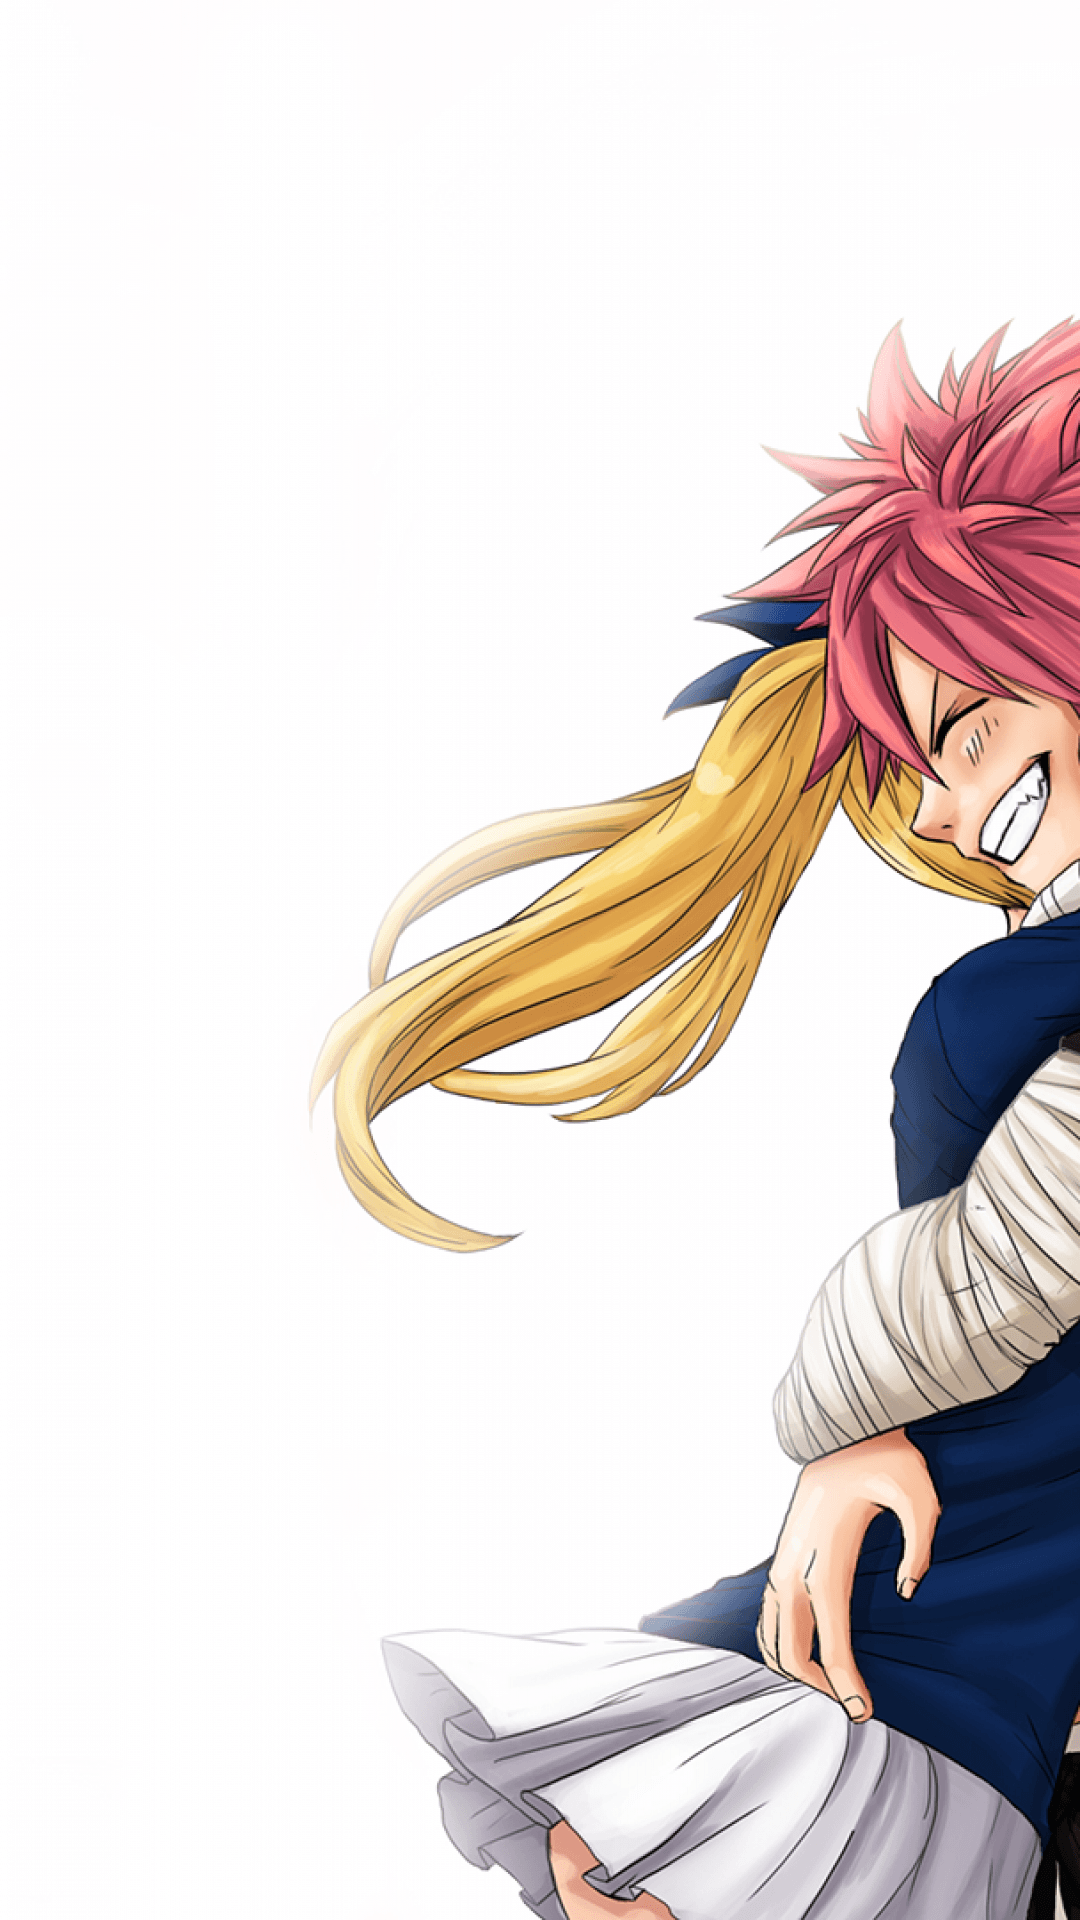 Fairy Tail Aesthetic Wallpapers - Wallpaper Cave